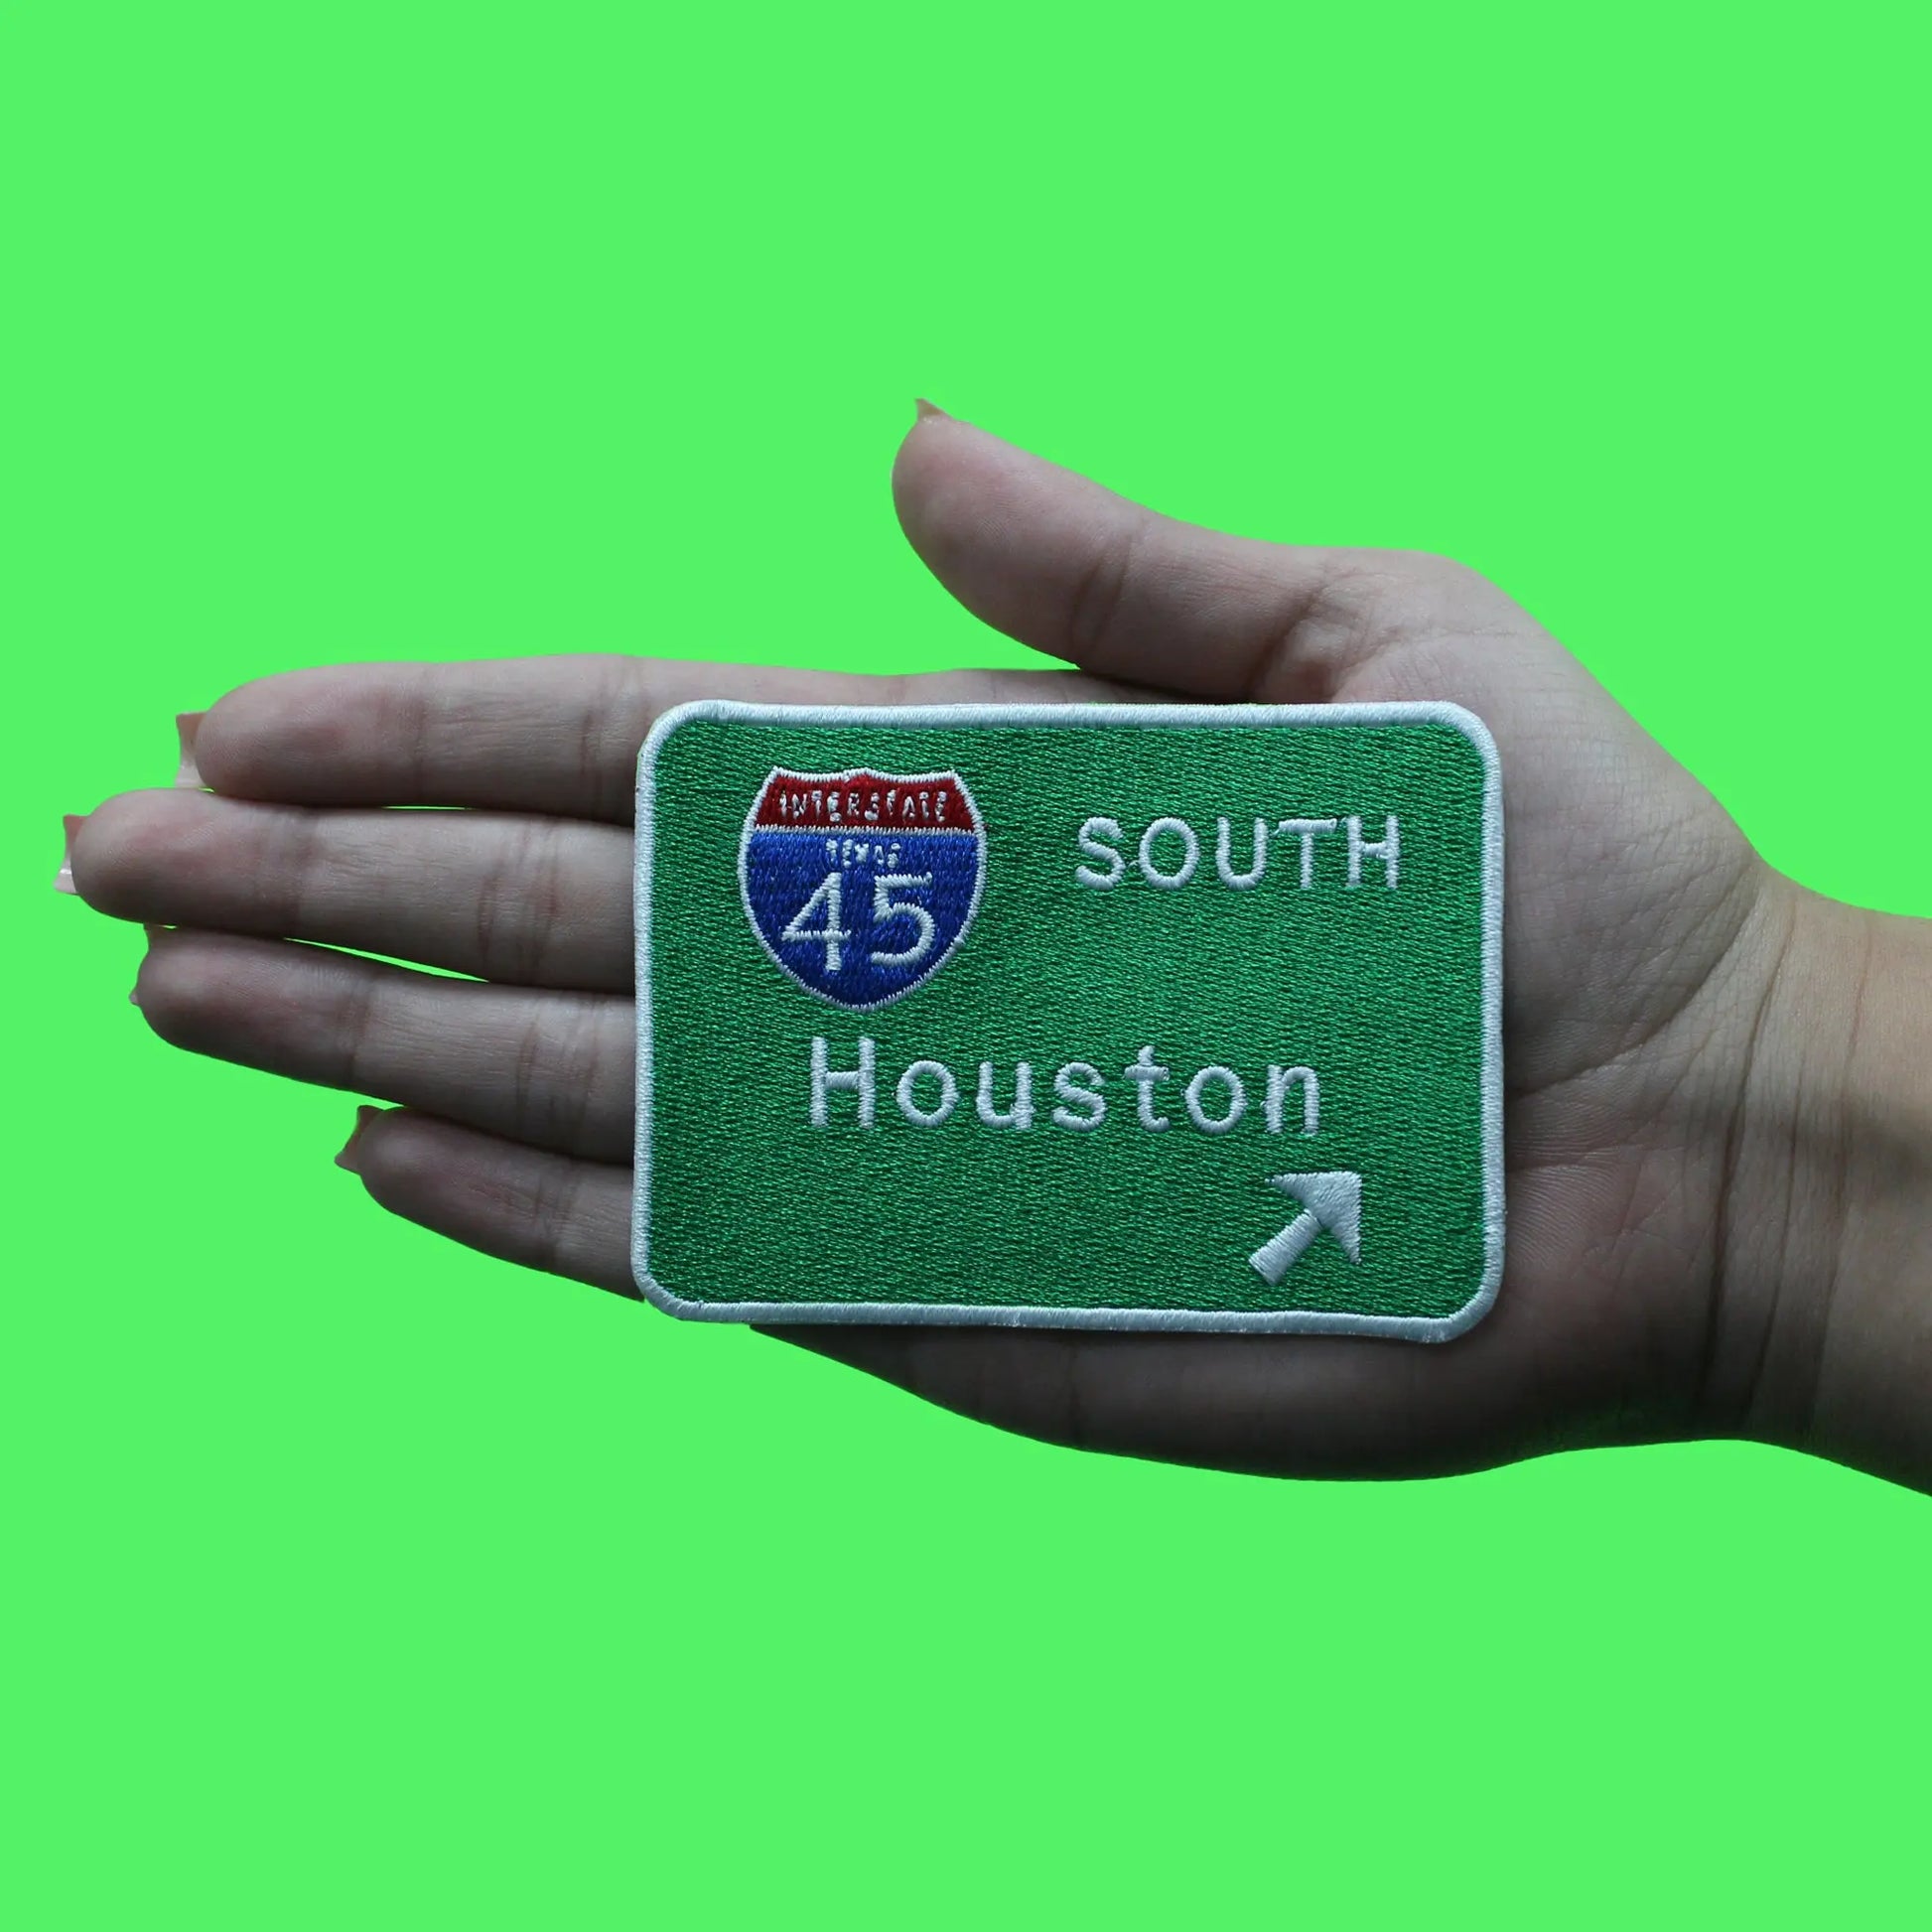 Houston 45 South Interstate Freeway Sign Patch Texas Embroidered Iron on